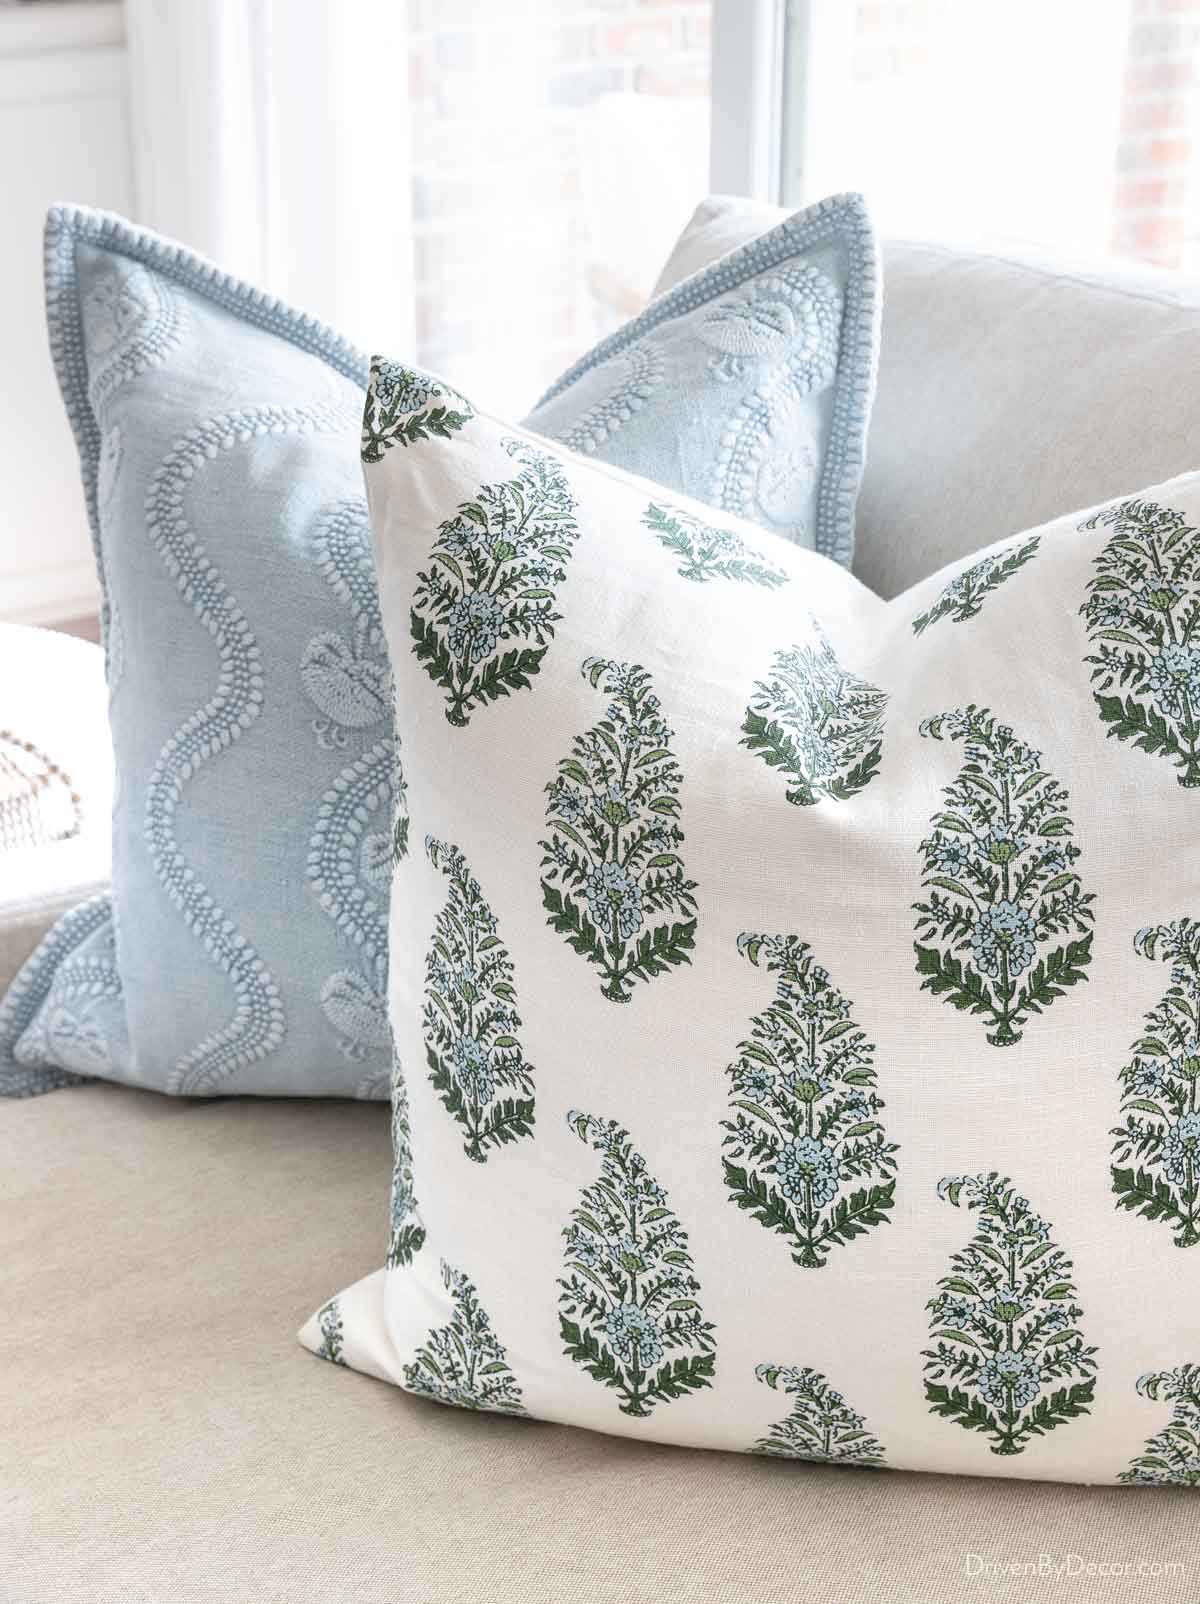 Floral patterned pillow cover from Etsy in green, blue, and cream